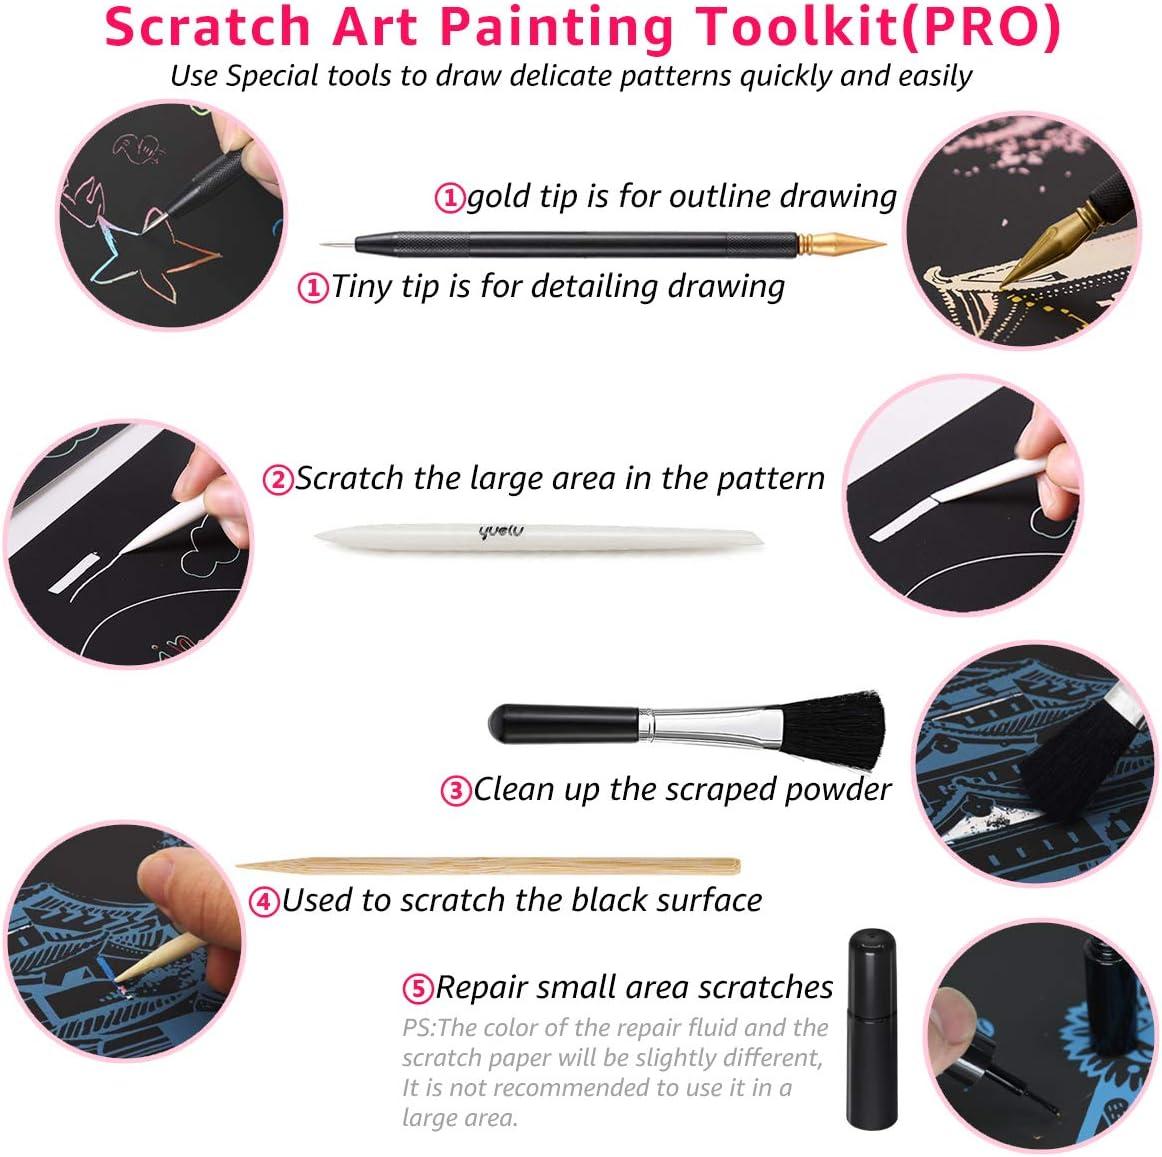 tool selection - How to keep scratch art paper clean and free of